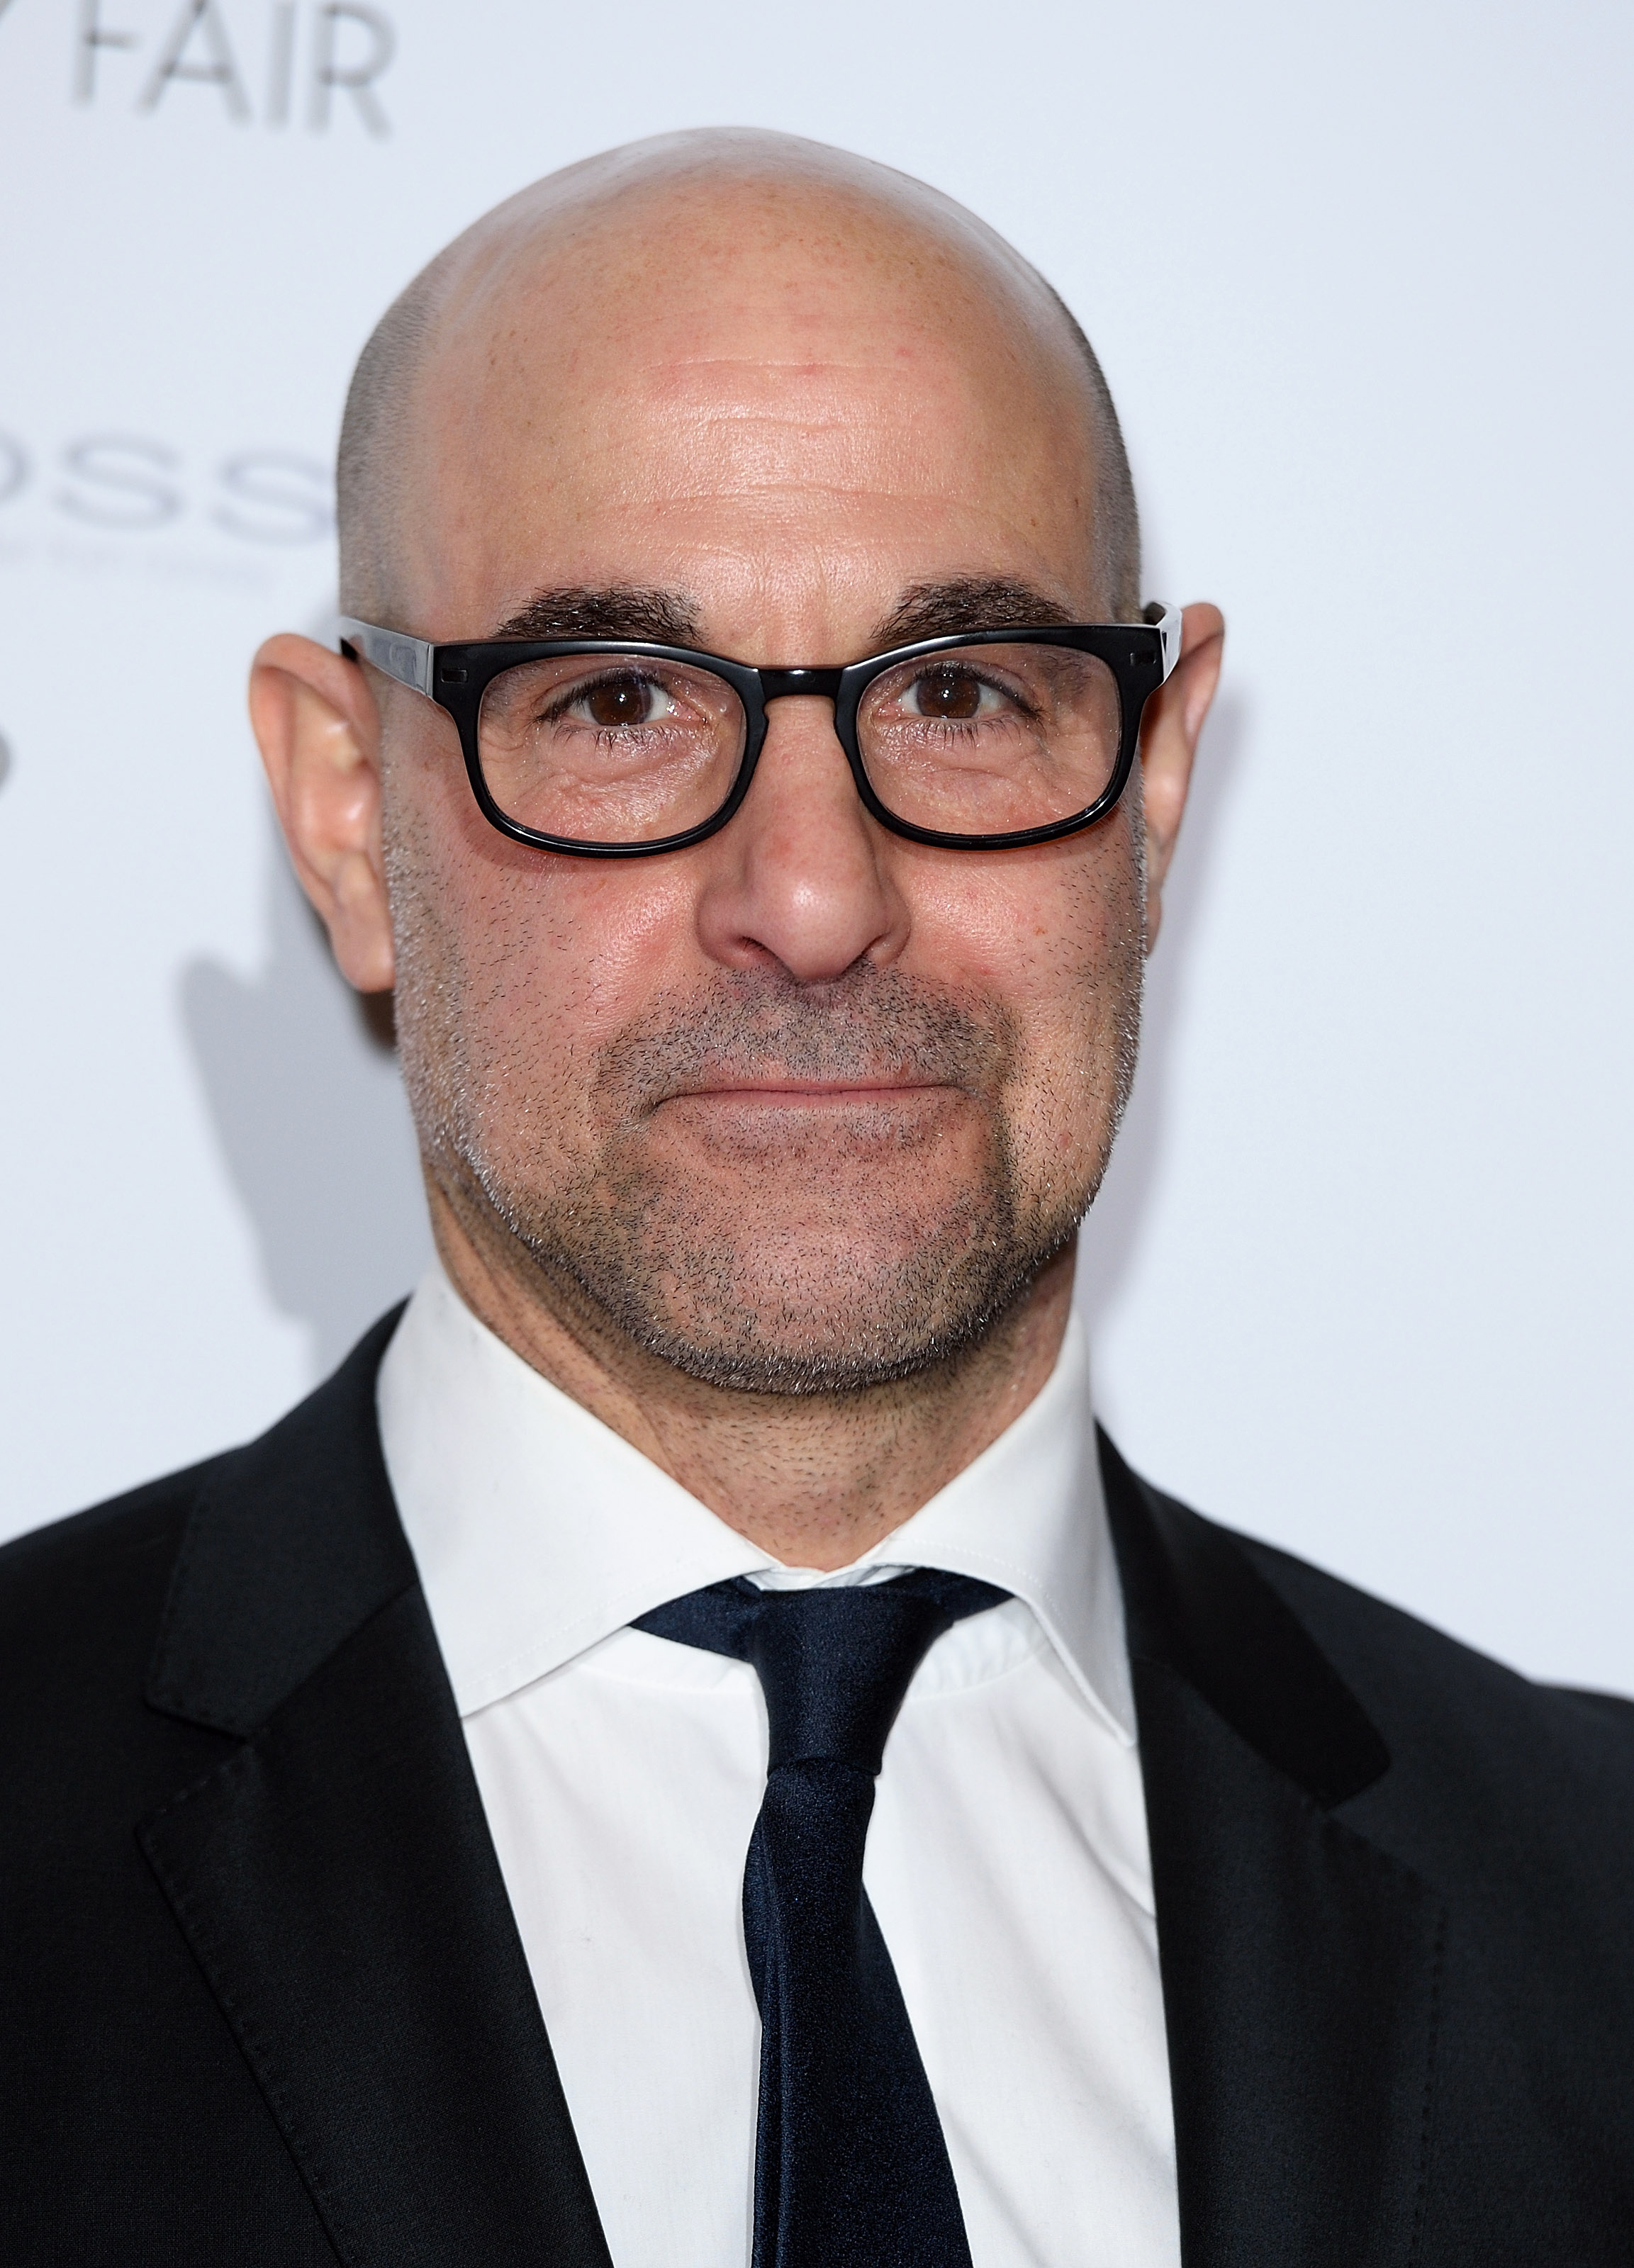 Stanley Tucci attends the London Critics' Circle Film Awards on January 18, 2015. (Karwai Tang)